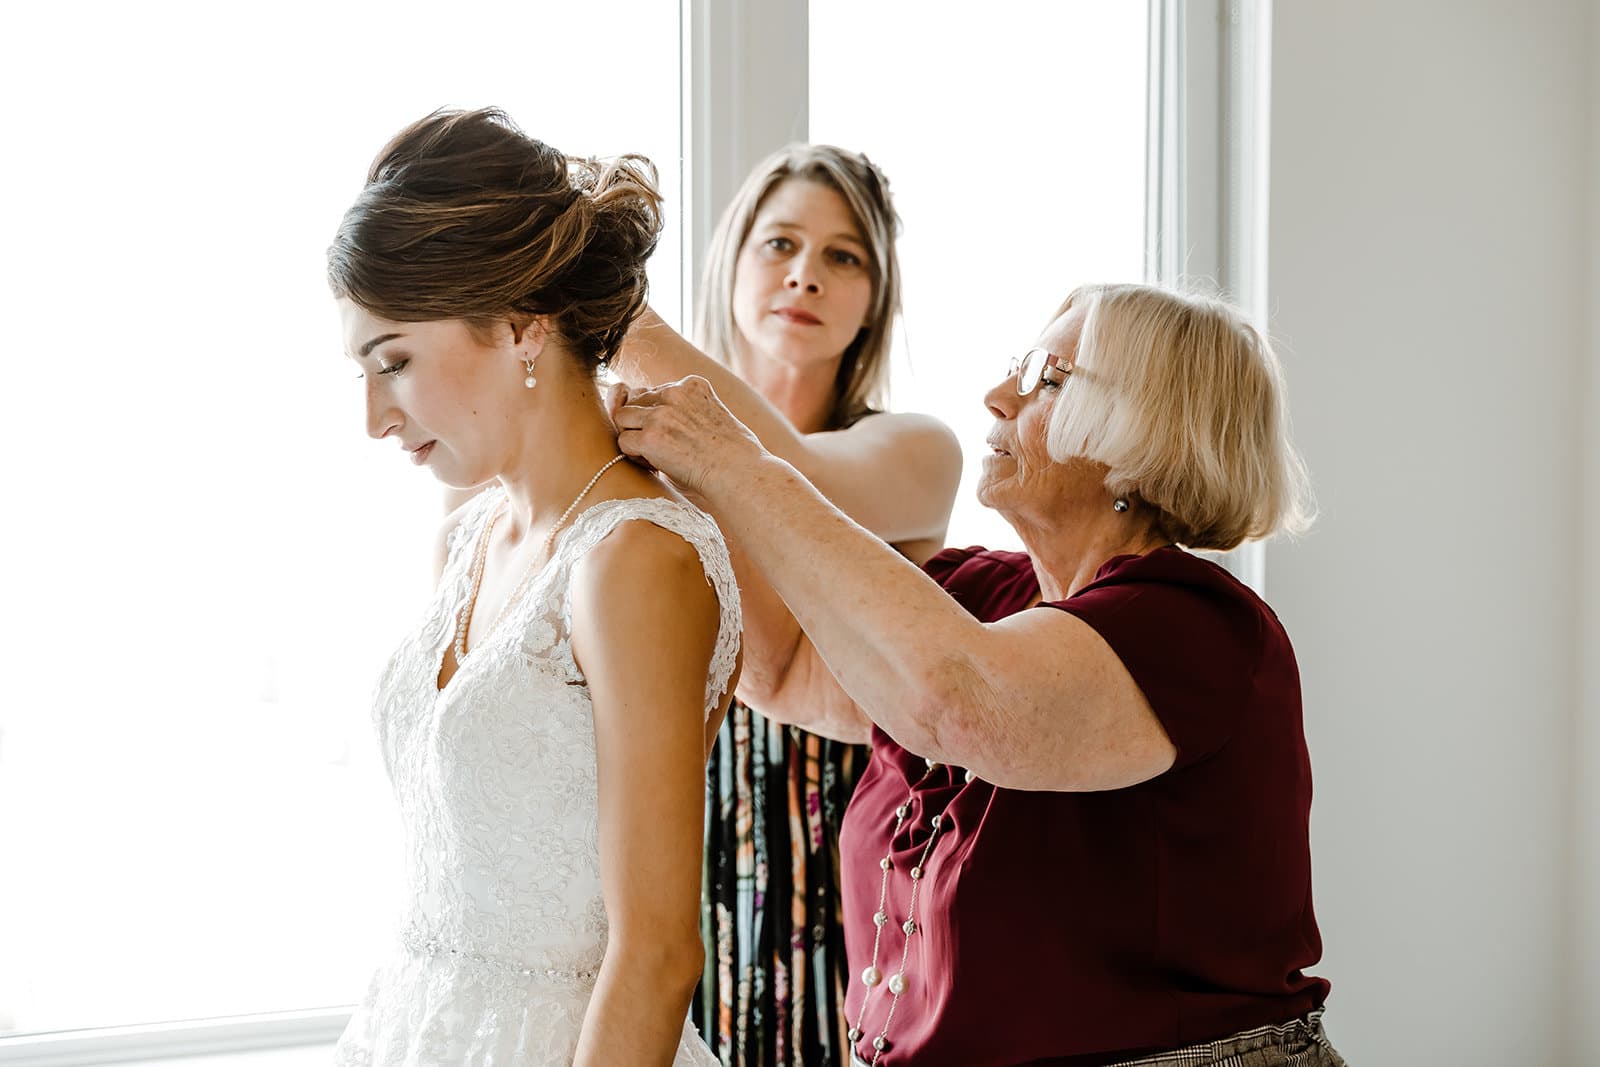 A bride including her family in her elopement by having her grandmother helping to put on her neckless, with the bride's mother in the background